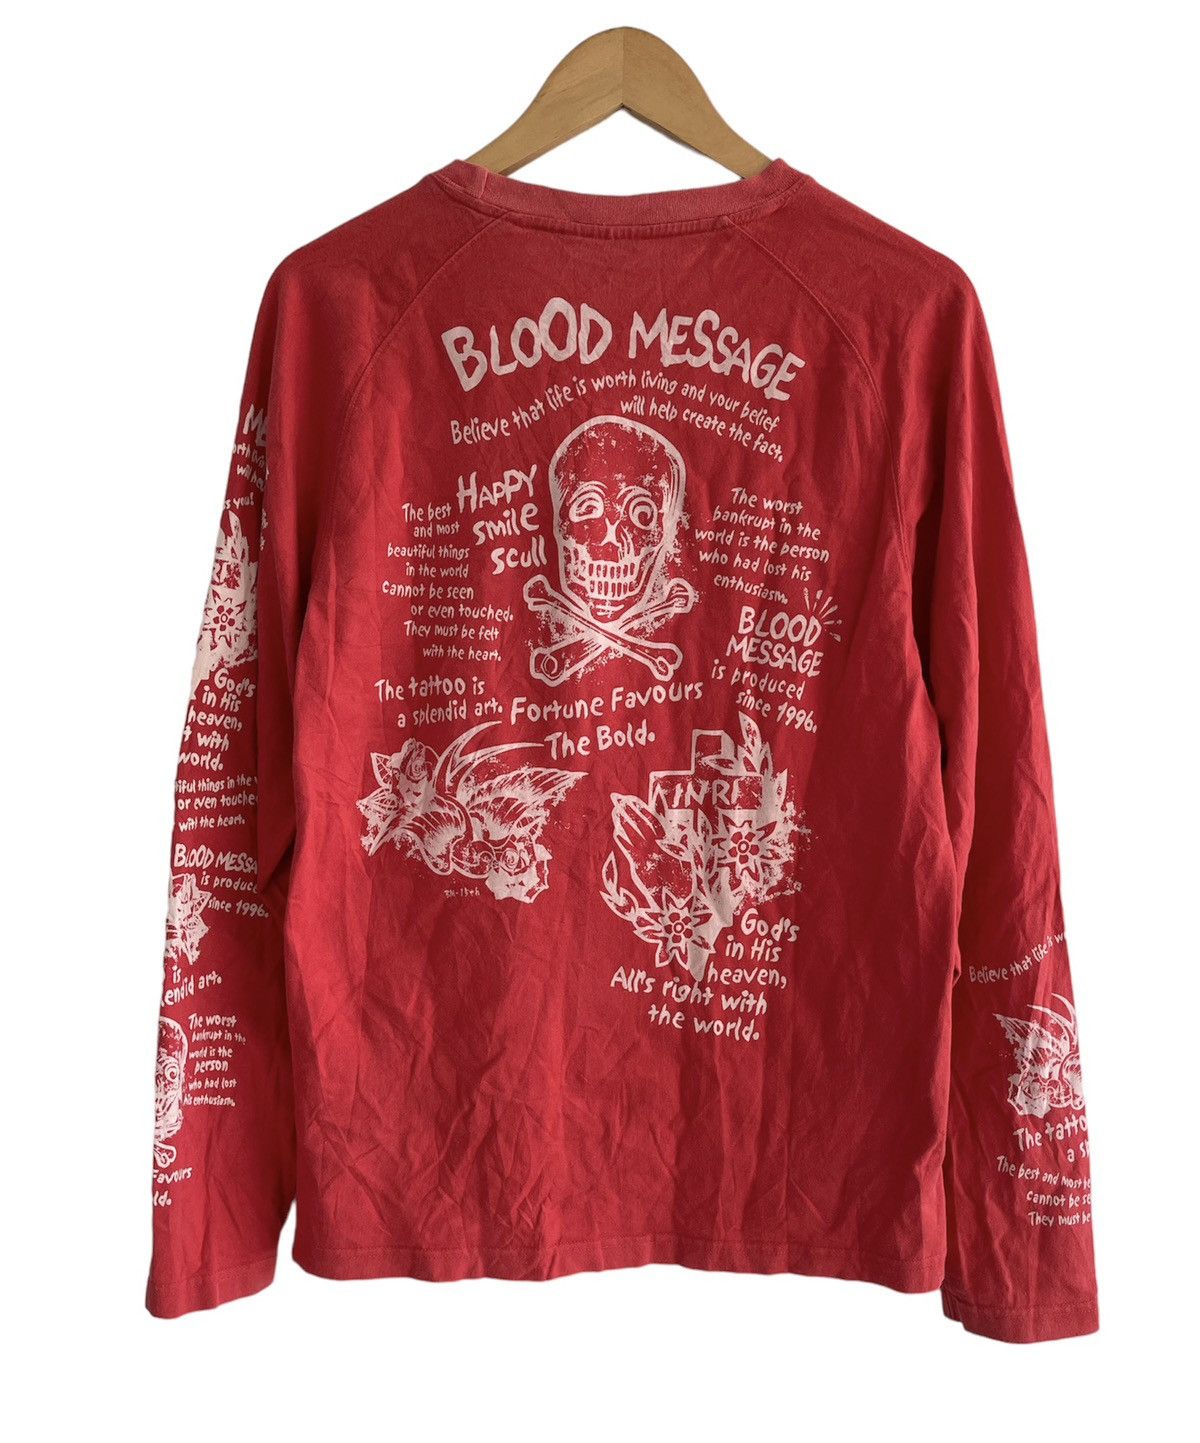 VINTAGE BLOOD MESSAGE TEE BY TEDMAN COMPANY - 2